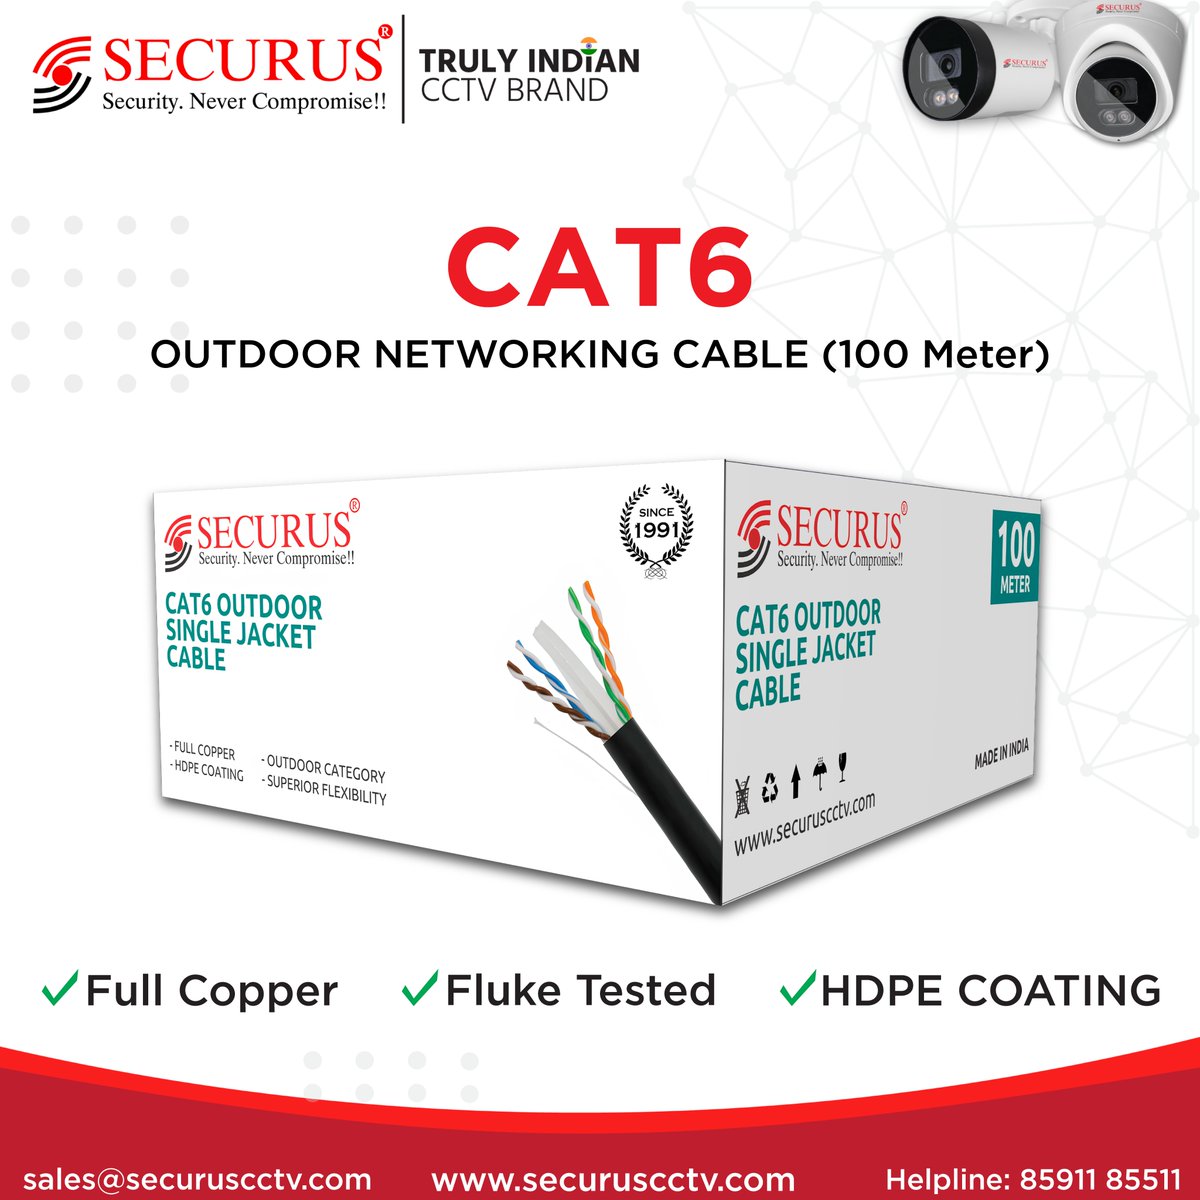 Get the most out of your network with our CAT6 Indoor Networking Cable. Durable construction, easy to install. What are you looking for in a new CAT6 networking cable? Comment below!

#CAT6 #networkingcables #businessnetworking #fastspeed #easyinstallation #homeoffice